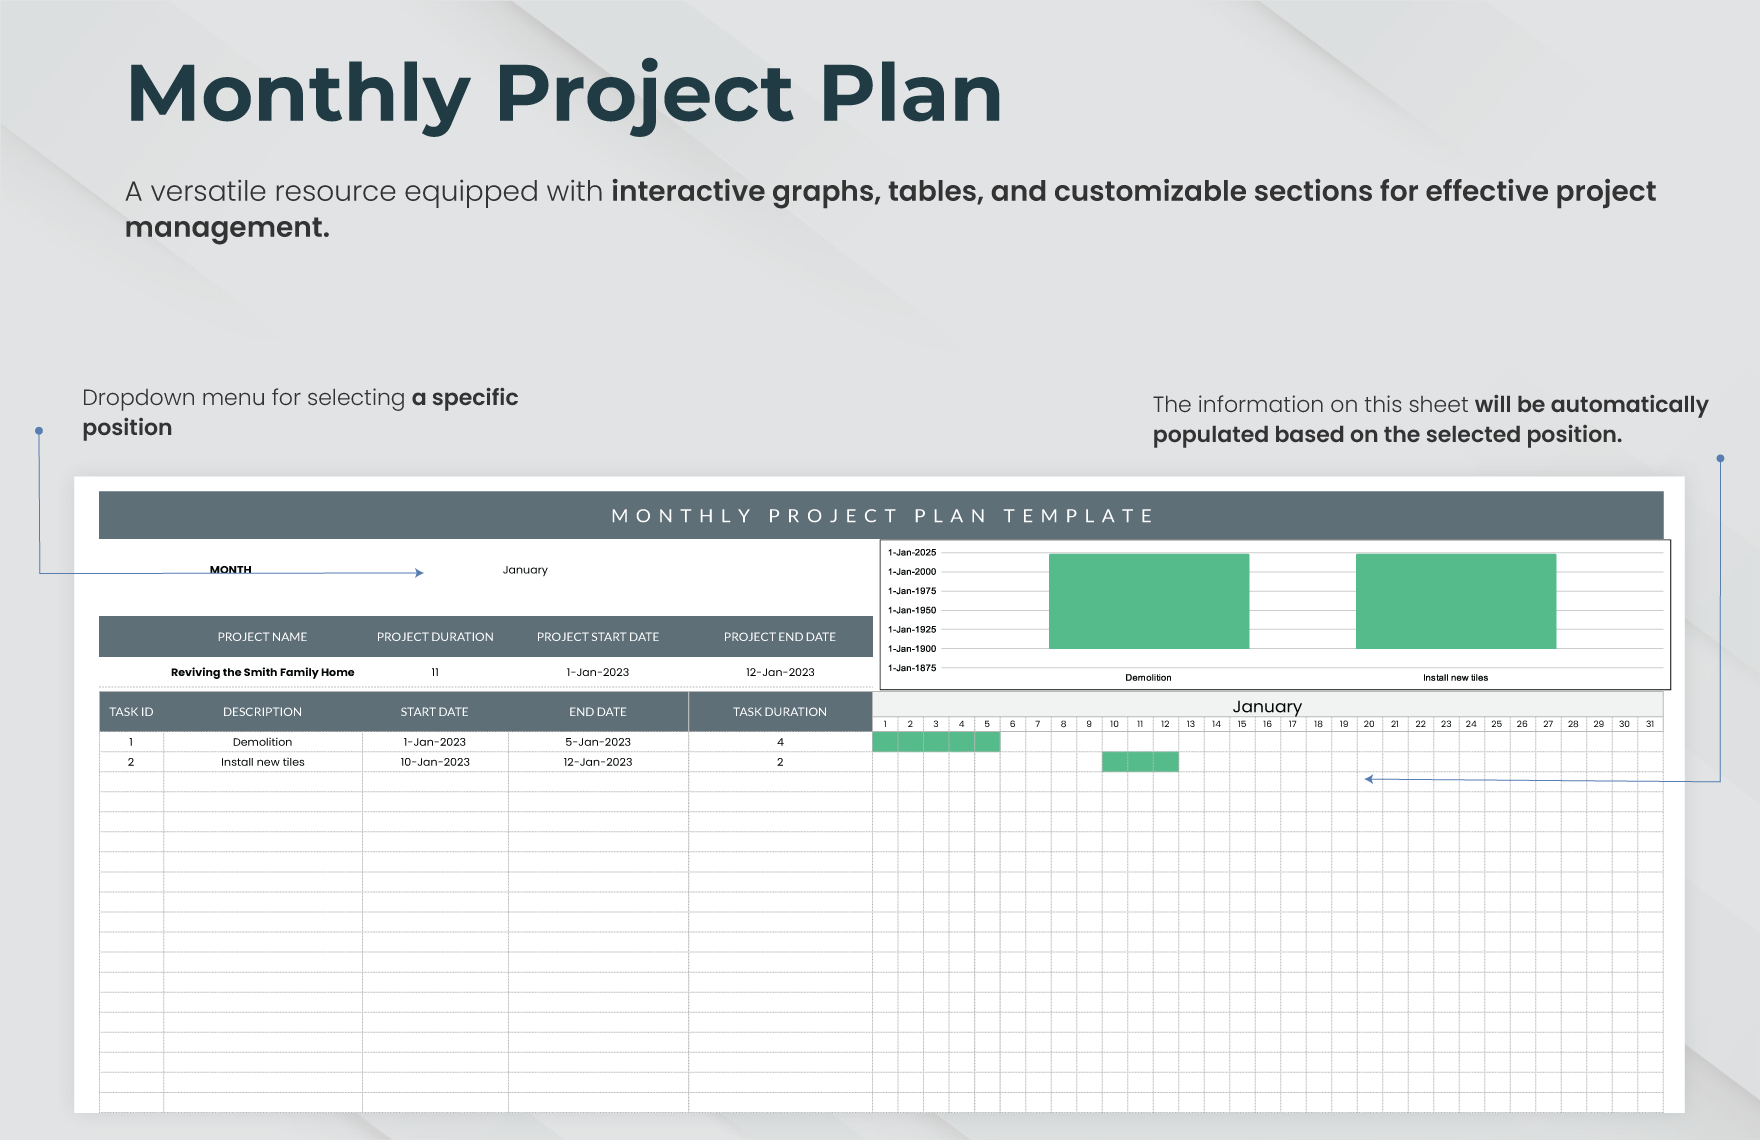 Monthly Project Plan Template